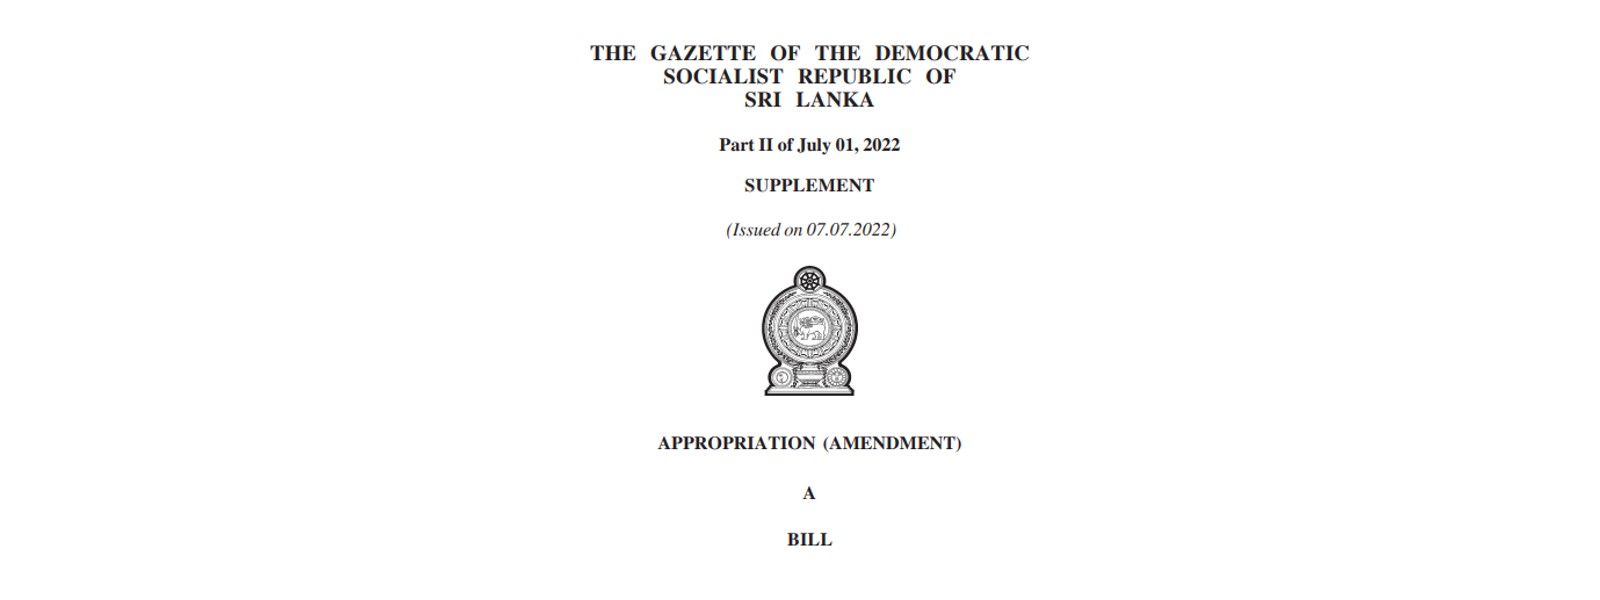 Amended Appropriation Bill presented to Parliament